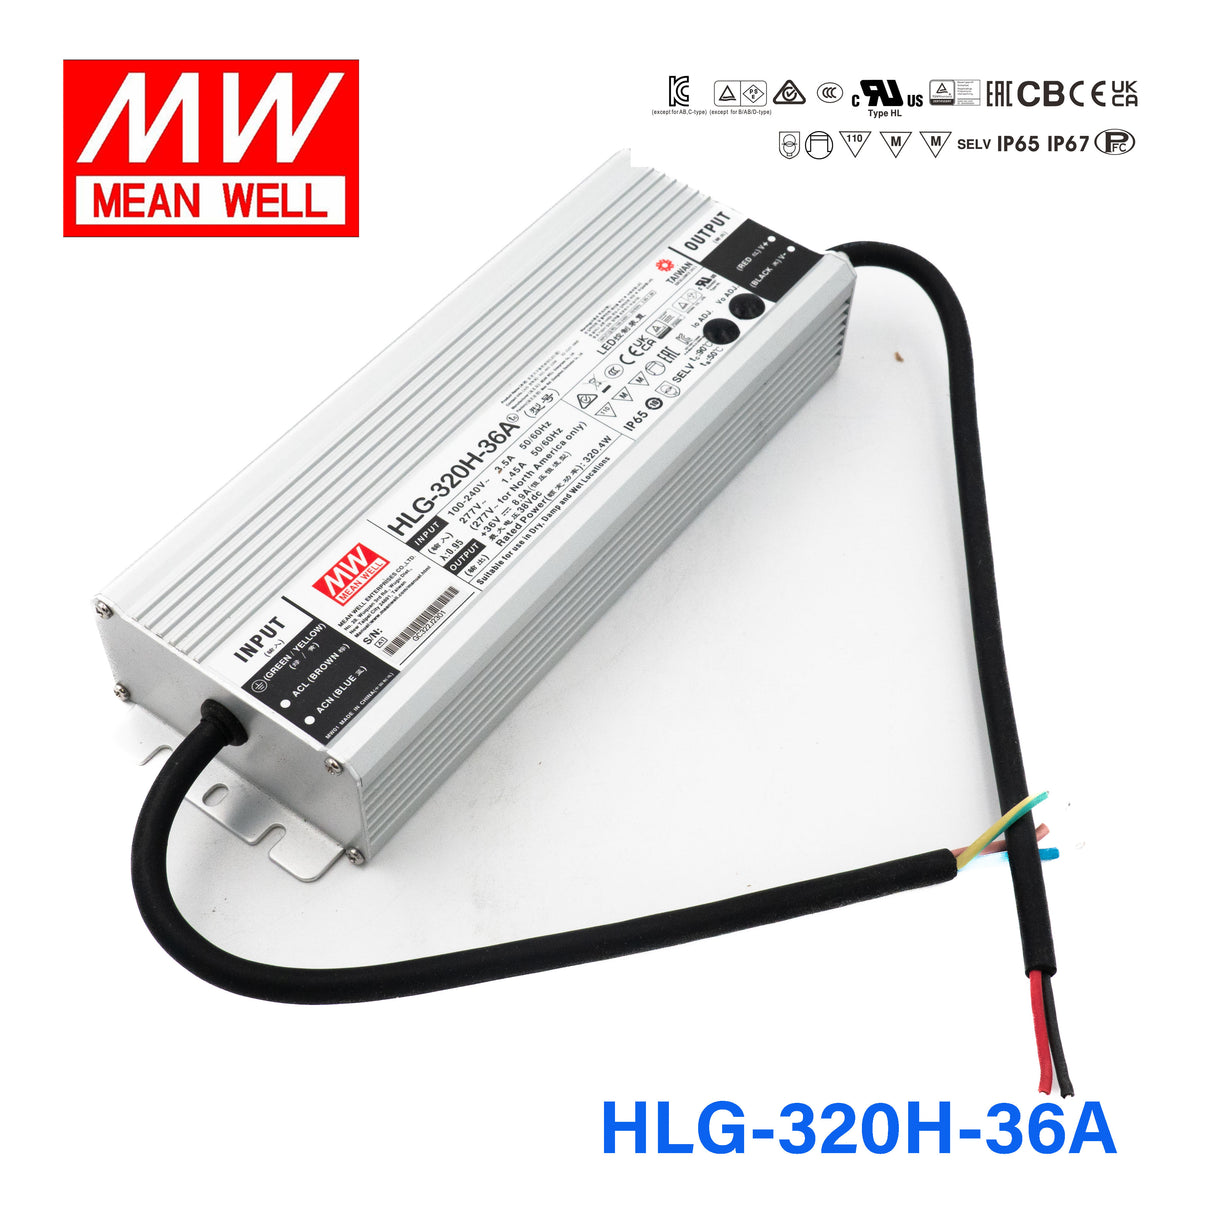 Mean Well HLG-320H-36A Power Supply 320W 36V - Adjustable